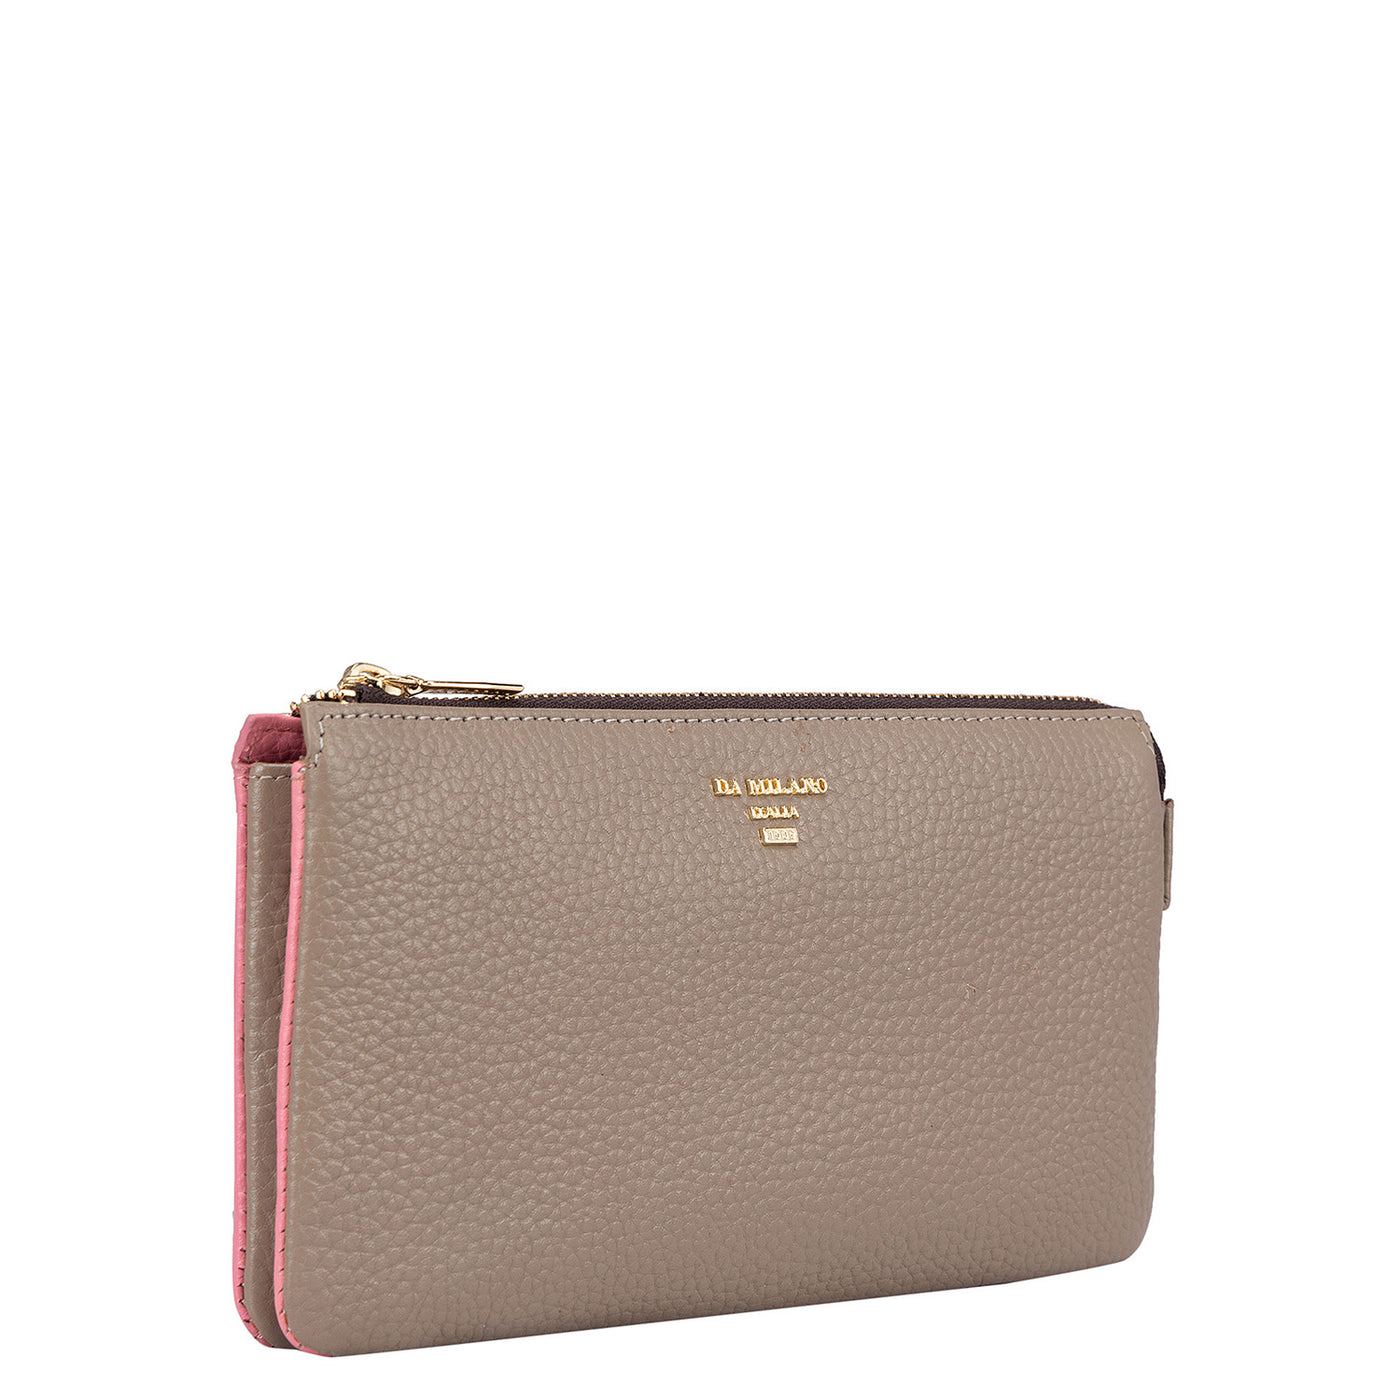 Wax Leather Ladies Wallet - Taupe & Hyper Pink